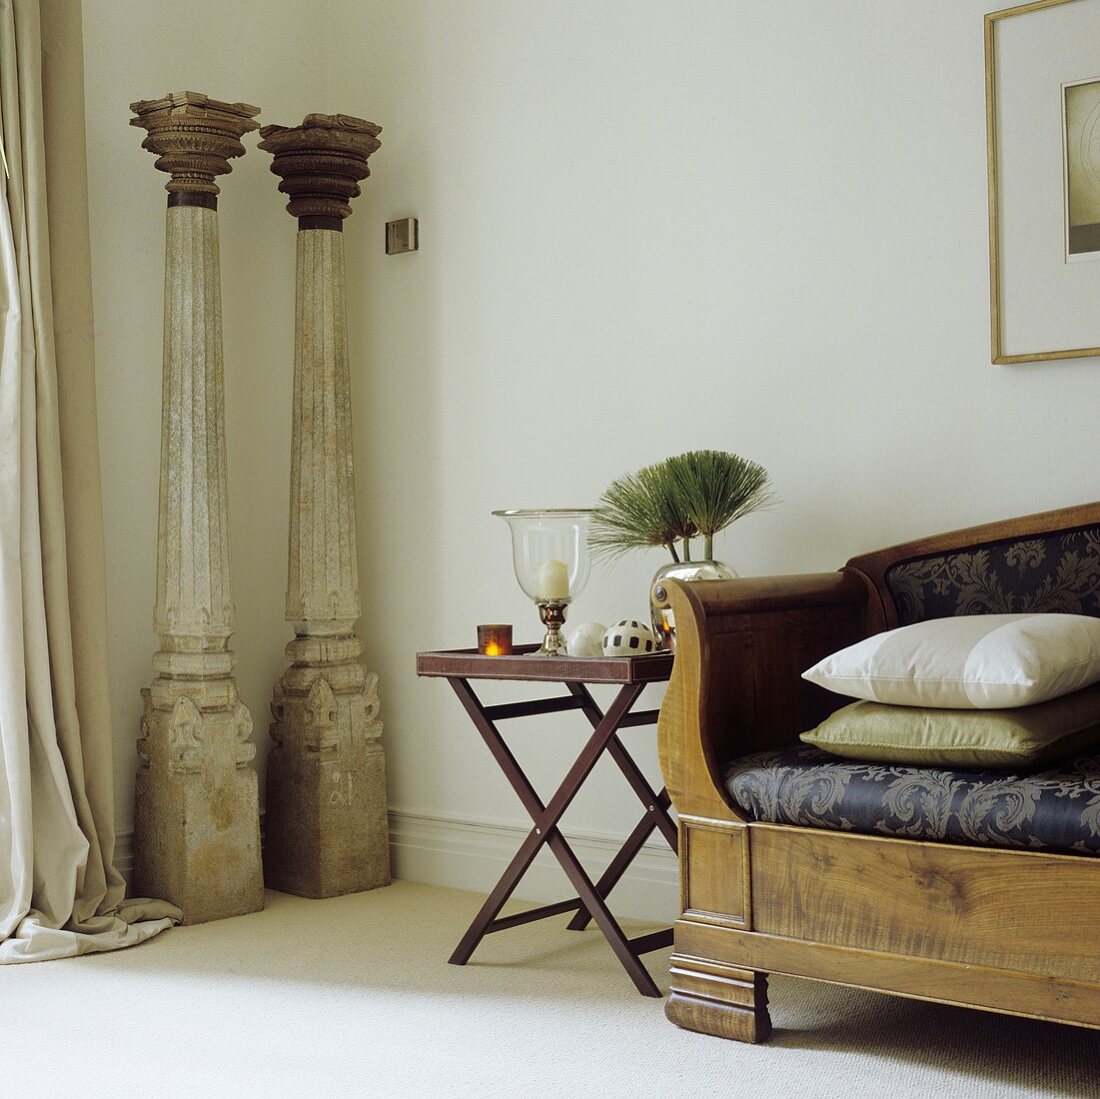 A delicate side table next to a wooden bench and decorative, antique pillars in a corner of a living room